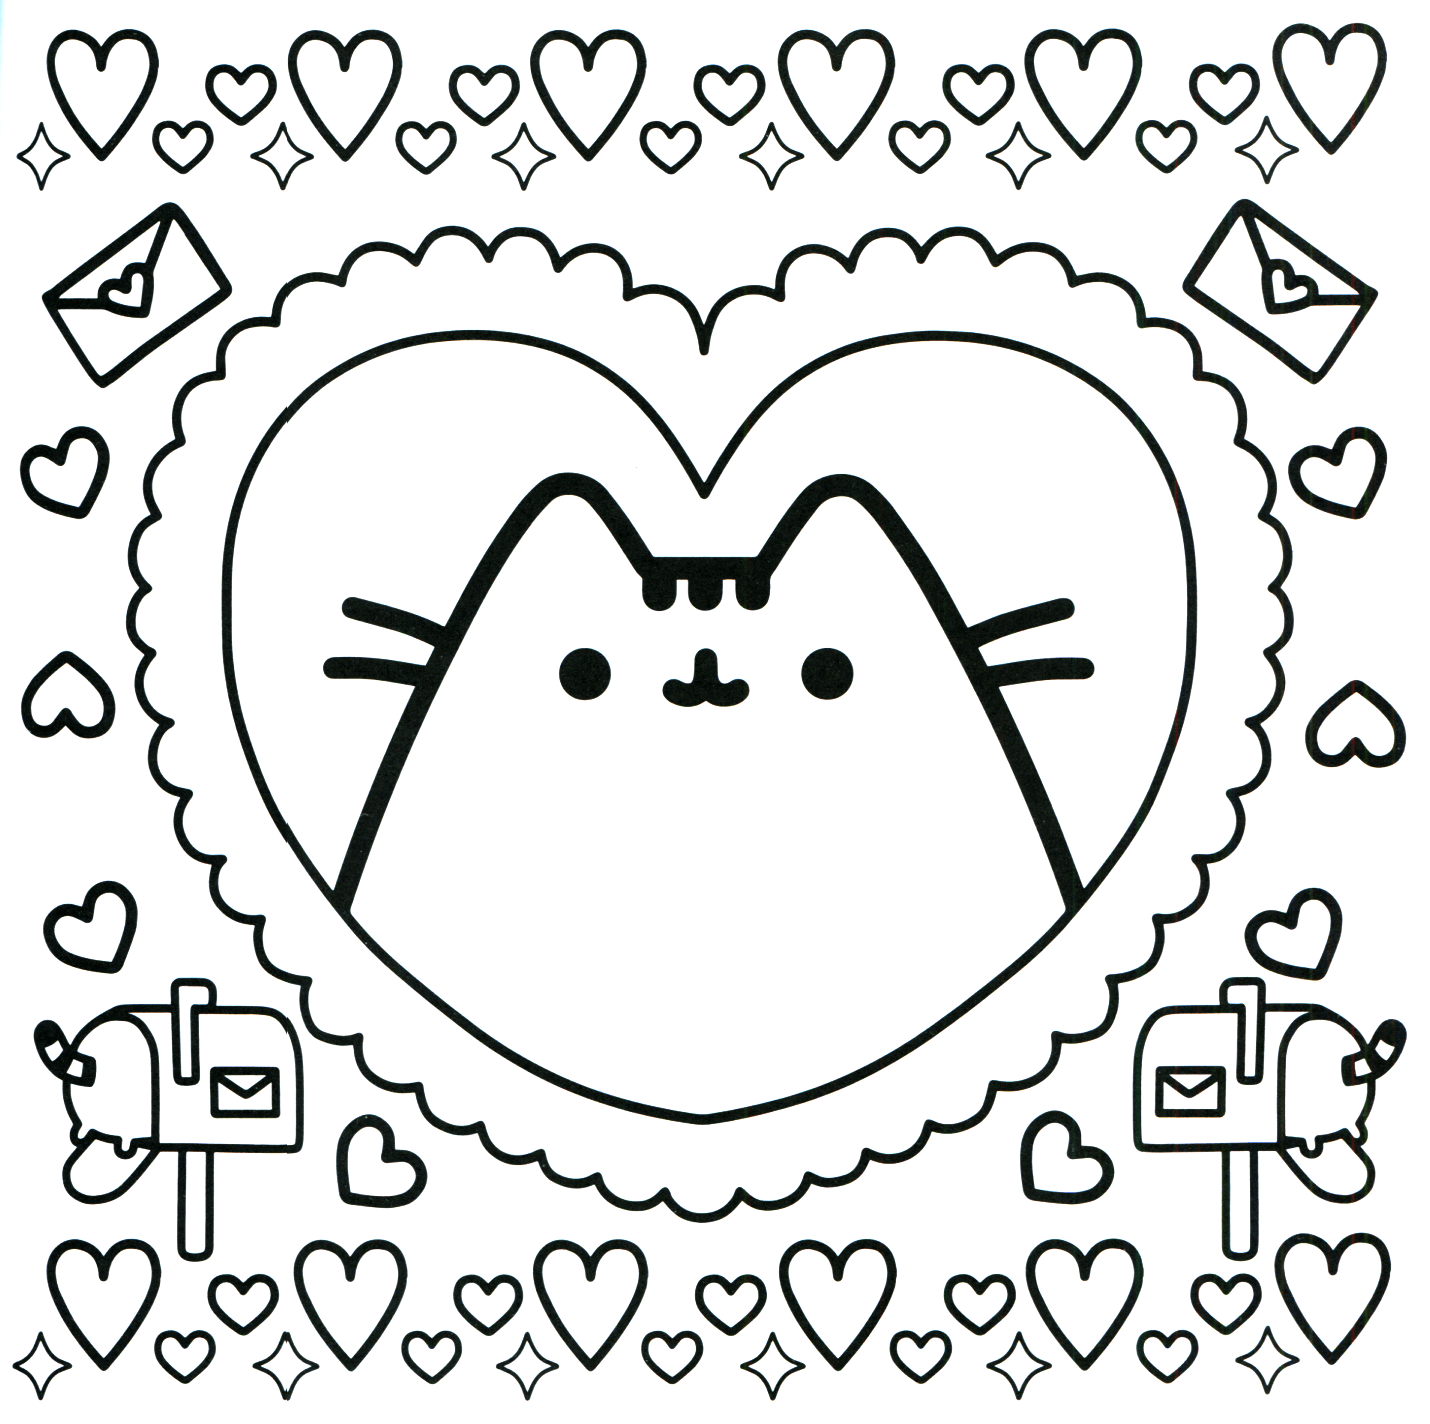 Pusheen Loves Mail Coloring Page